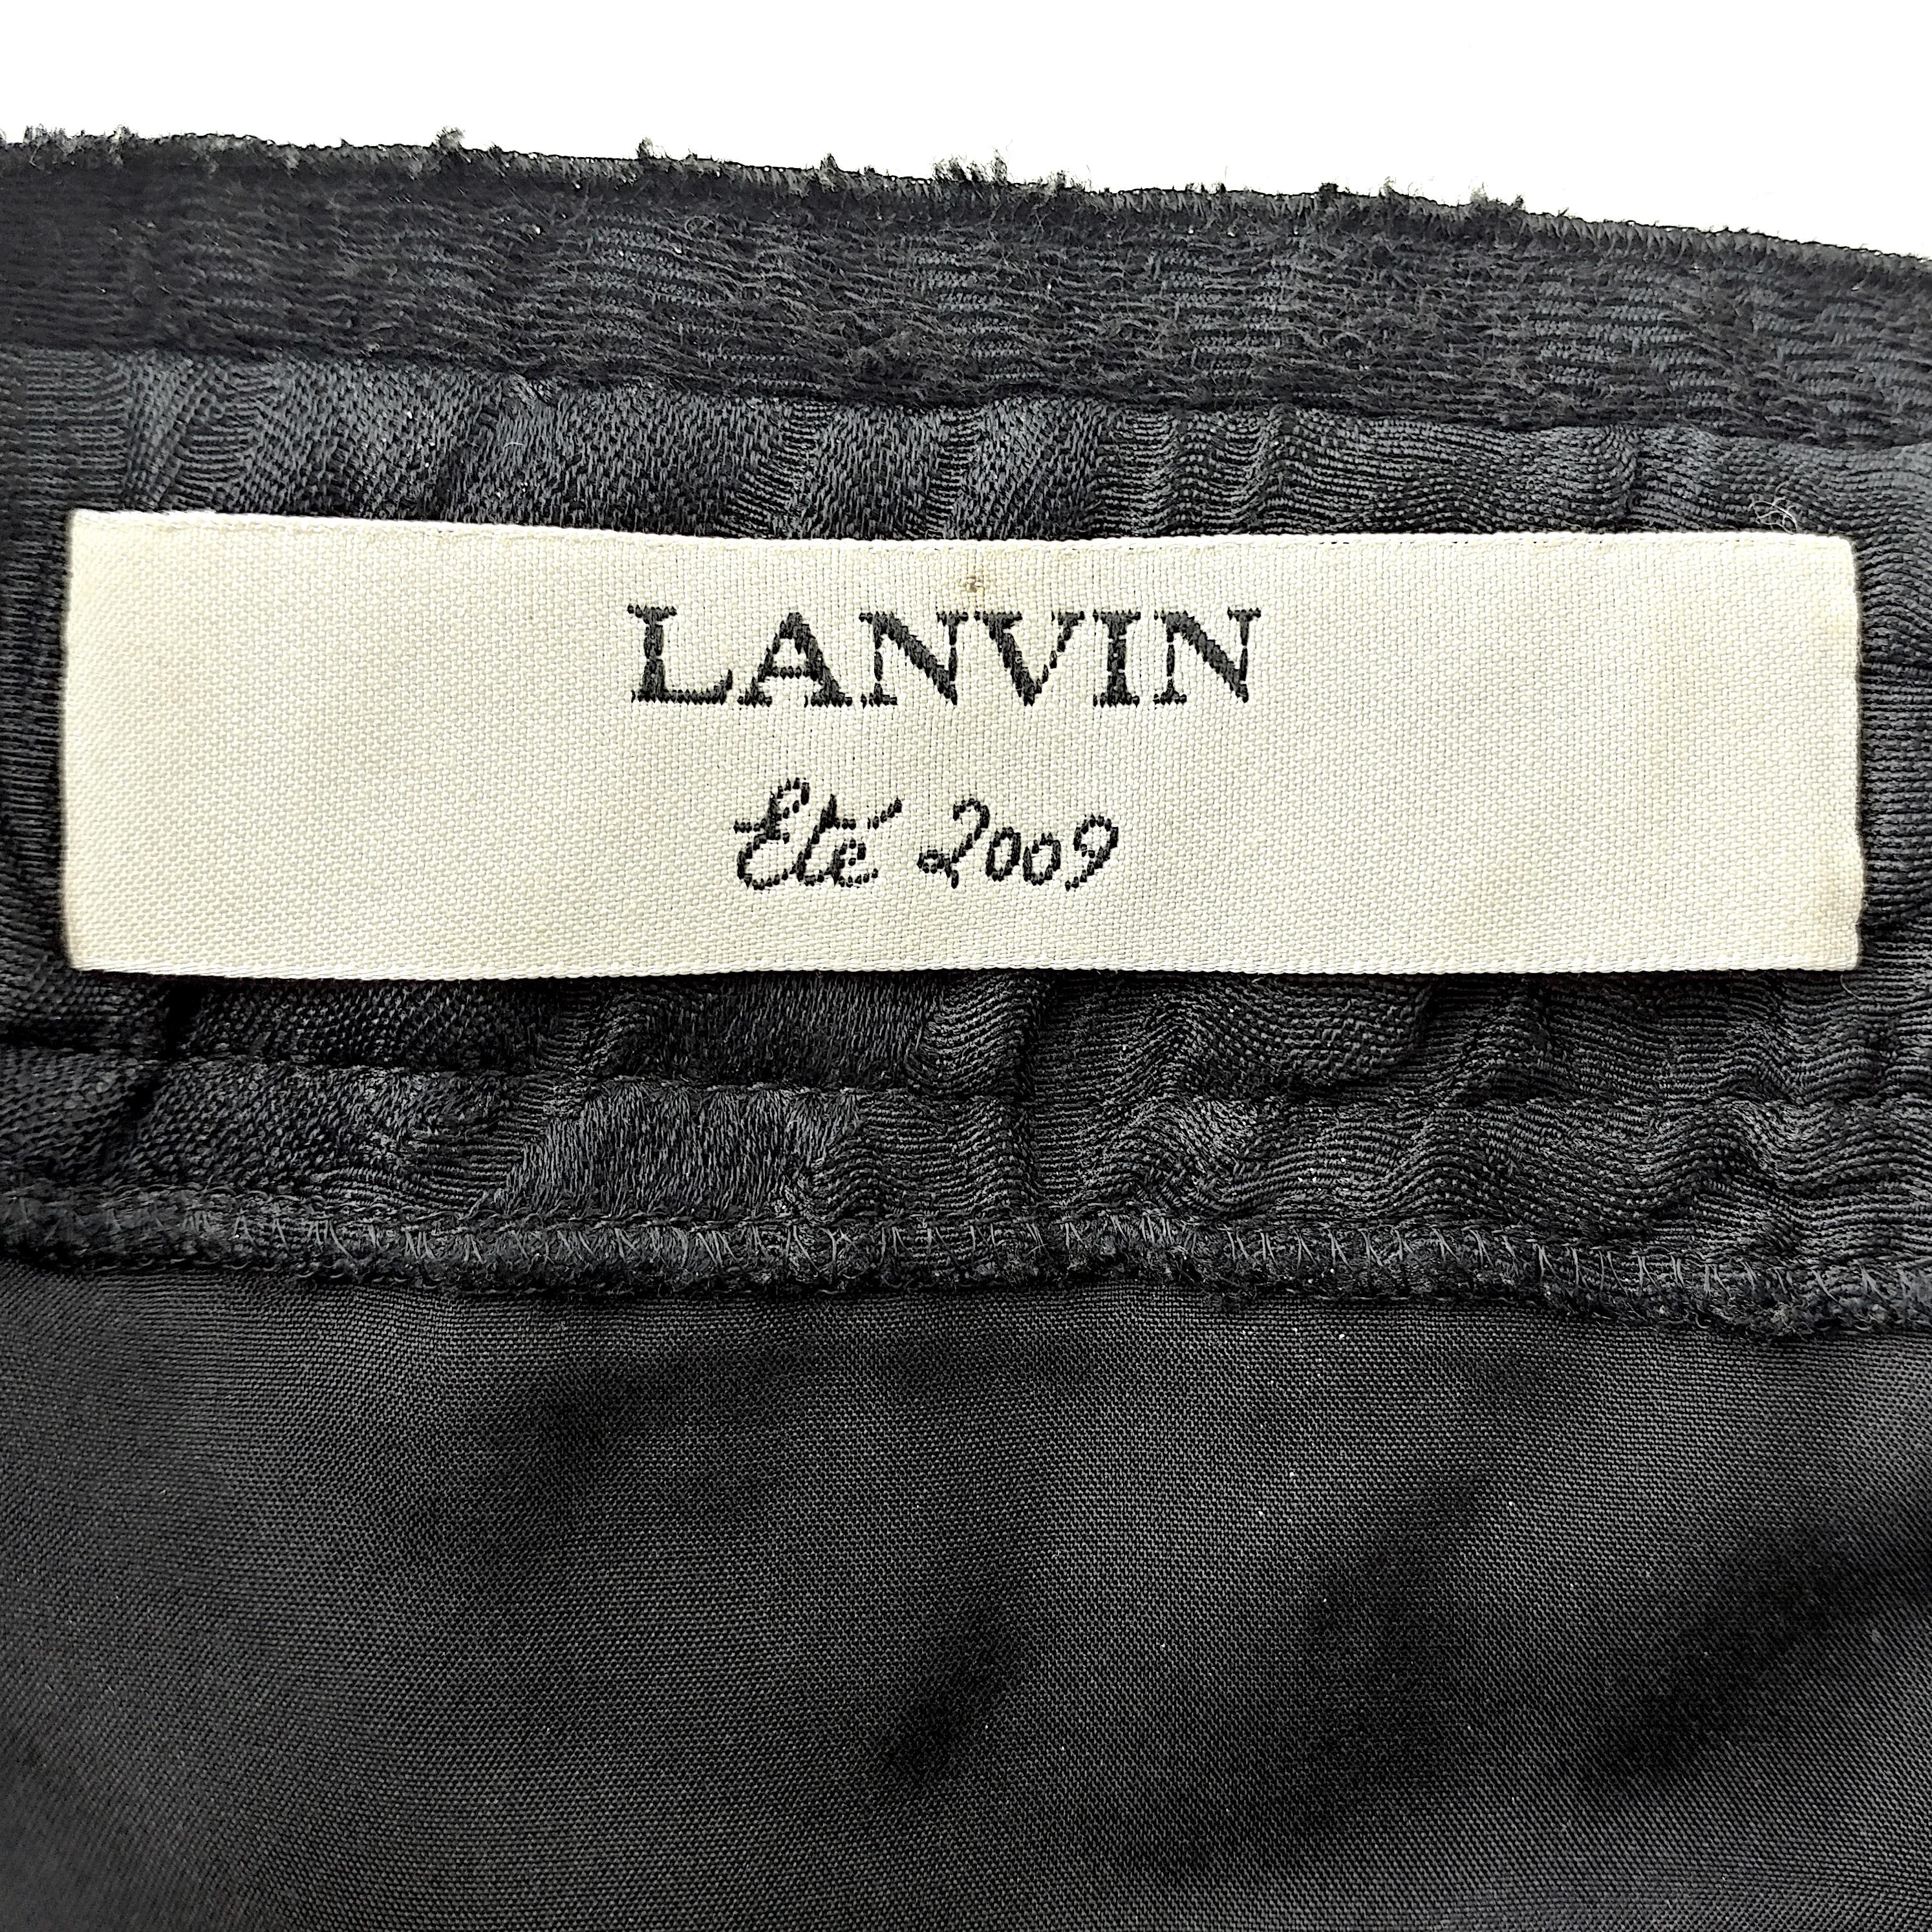 LANVIN – Authentic Black Pencil Skirt from the SS '09 Runway  Size 8US 40EU 1